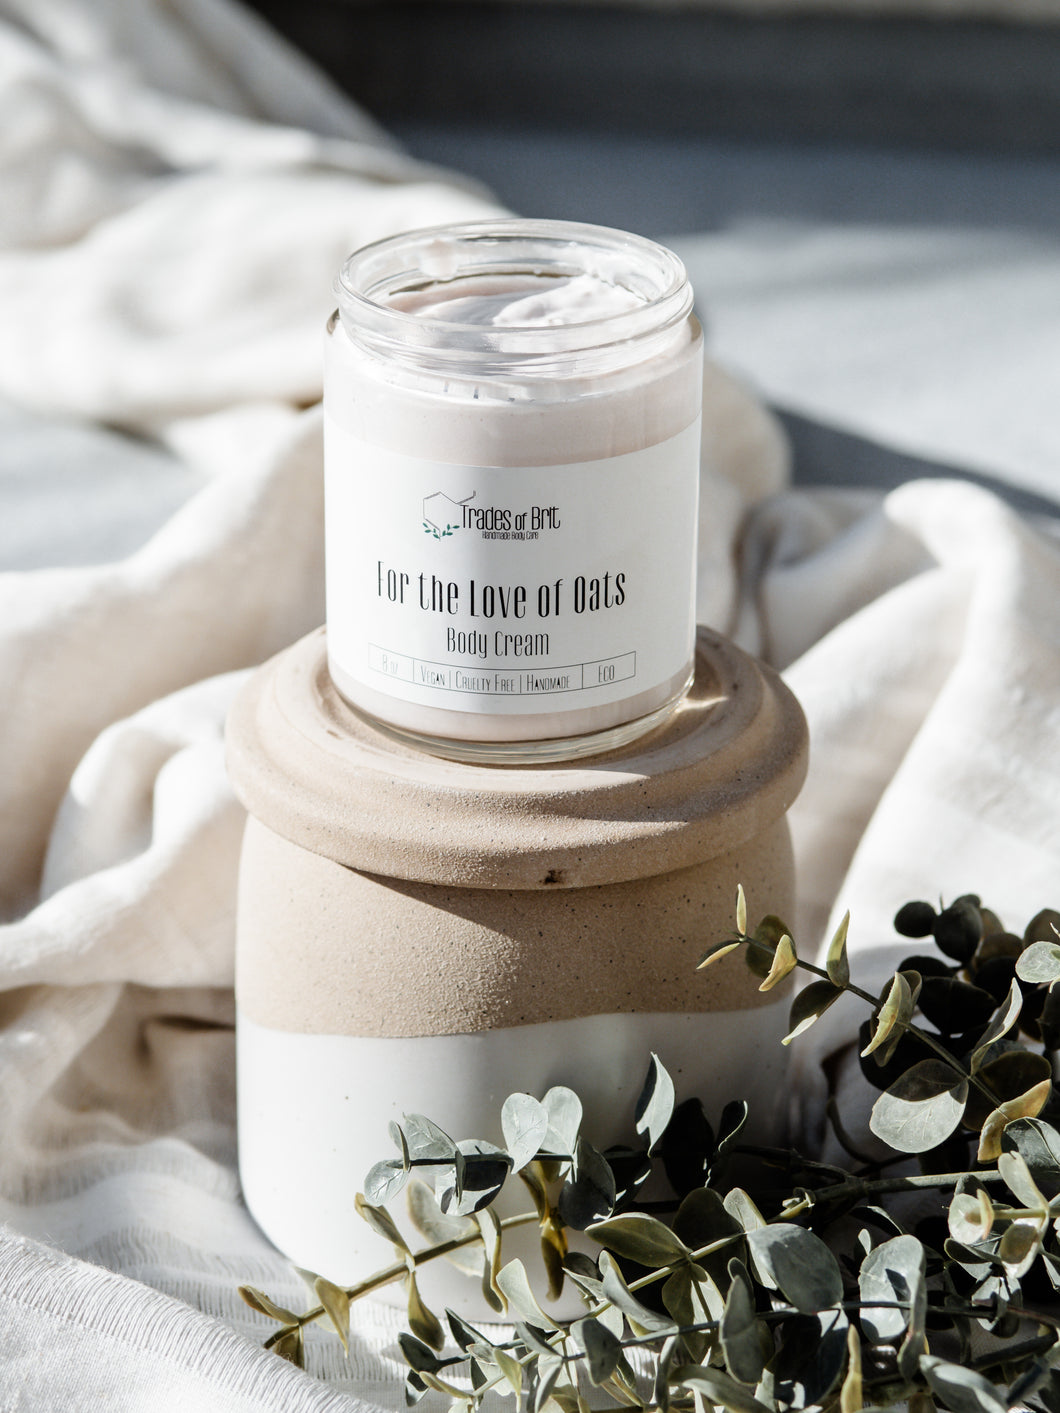 For the Love of Oats (FTLOO) Body Cream